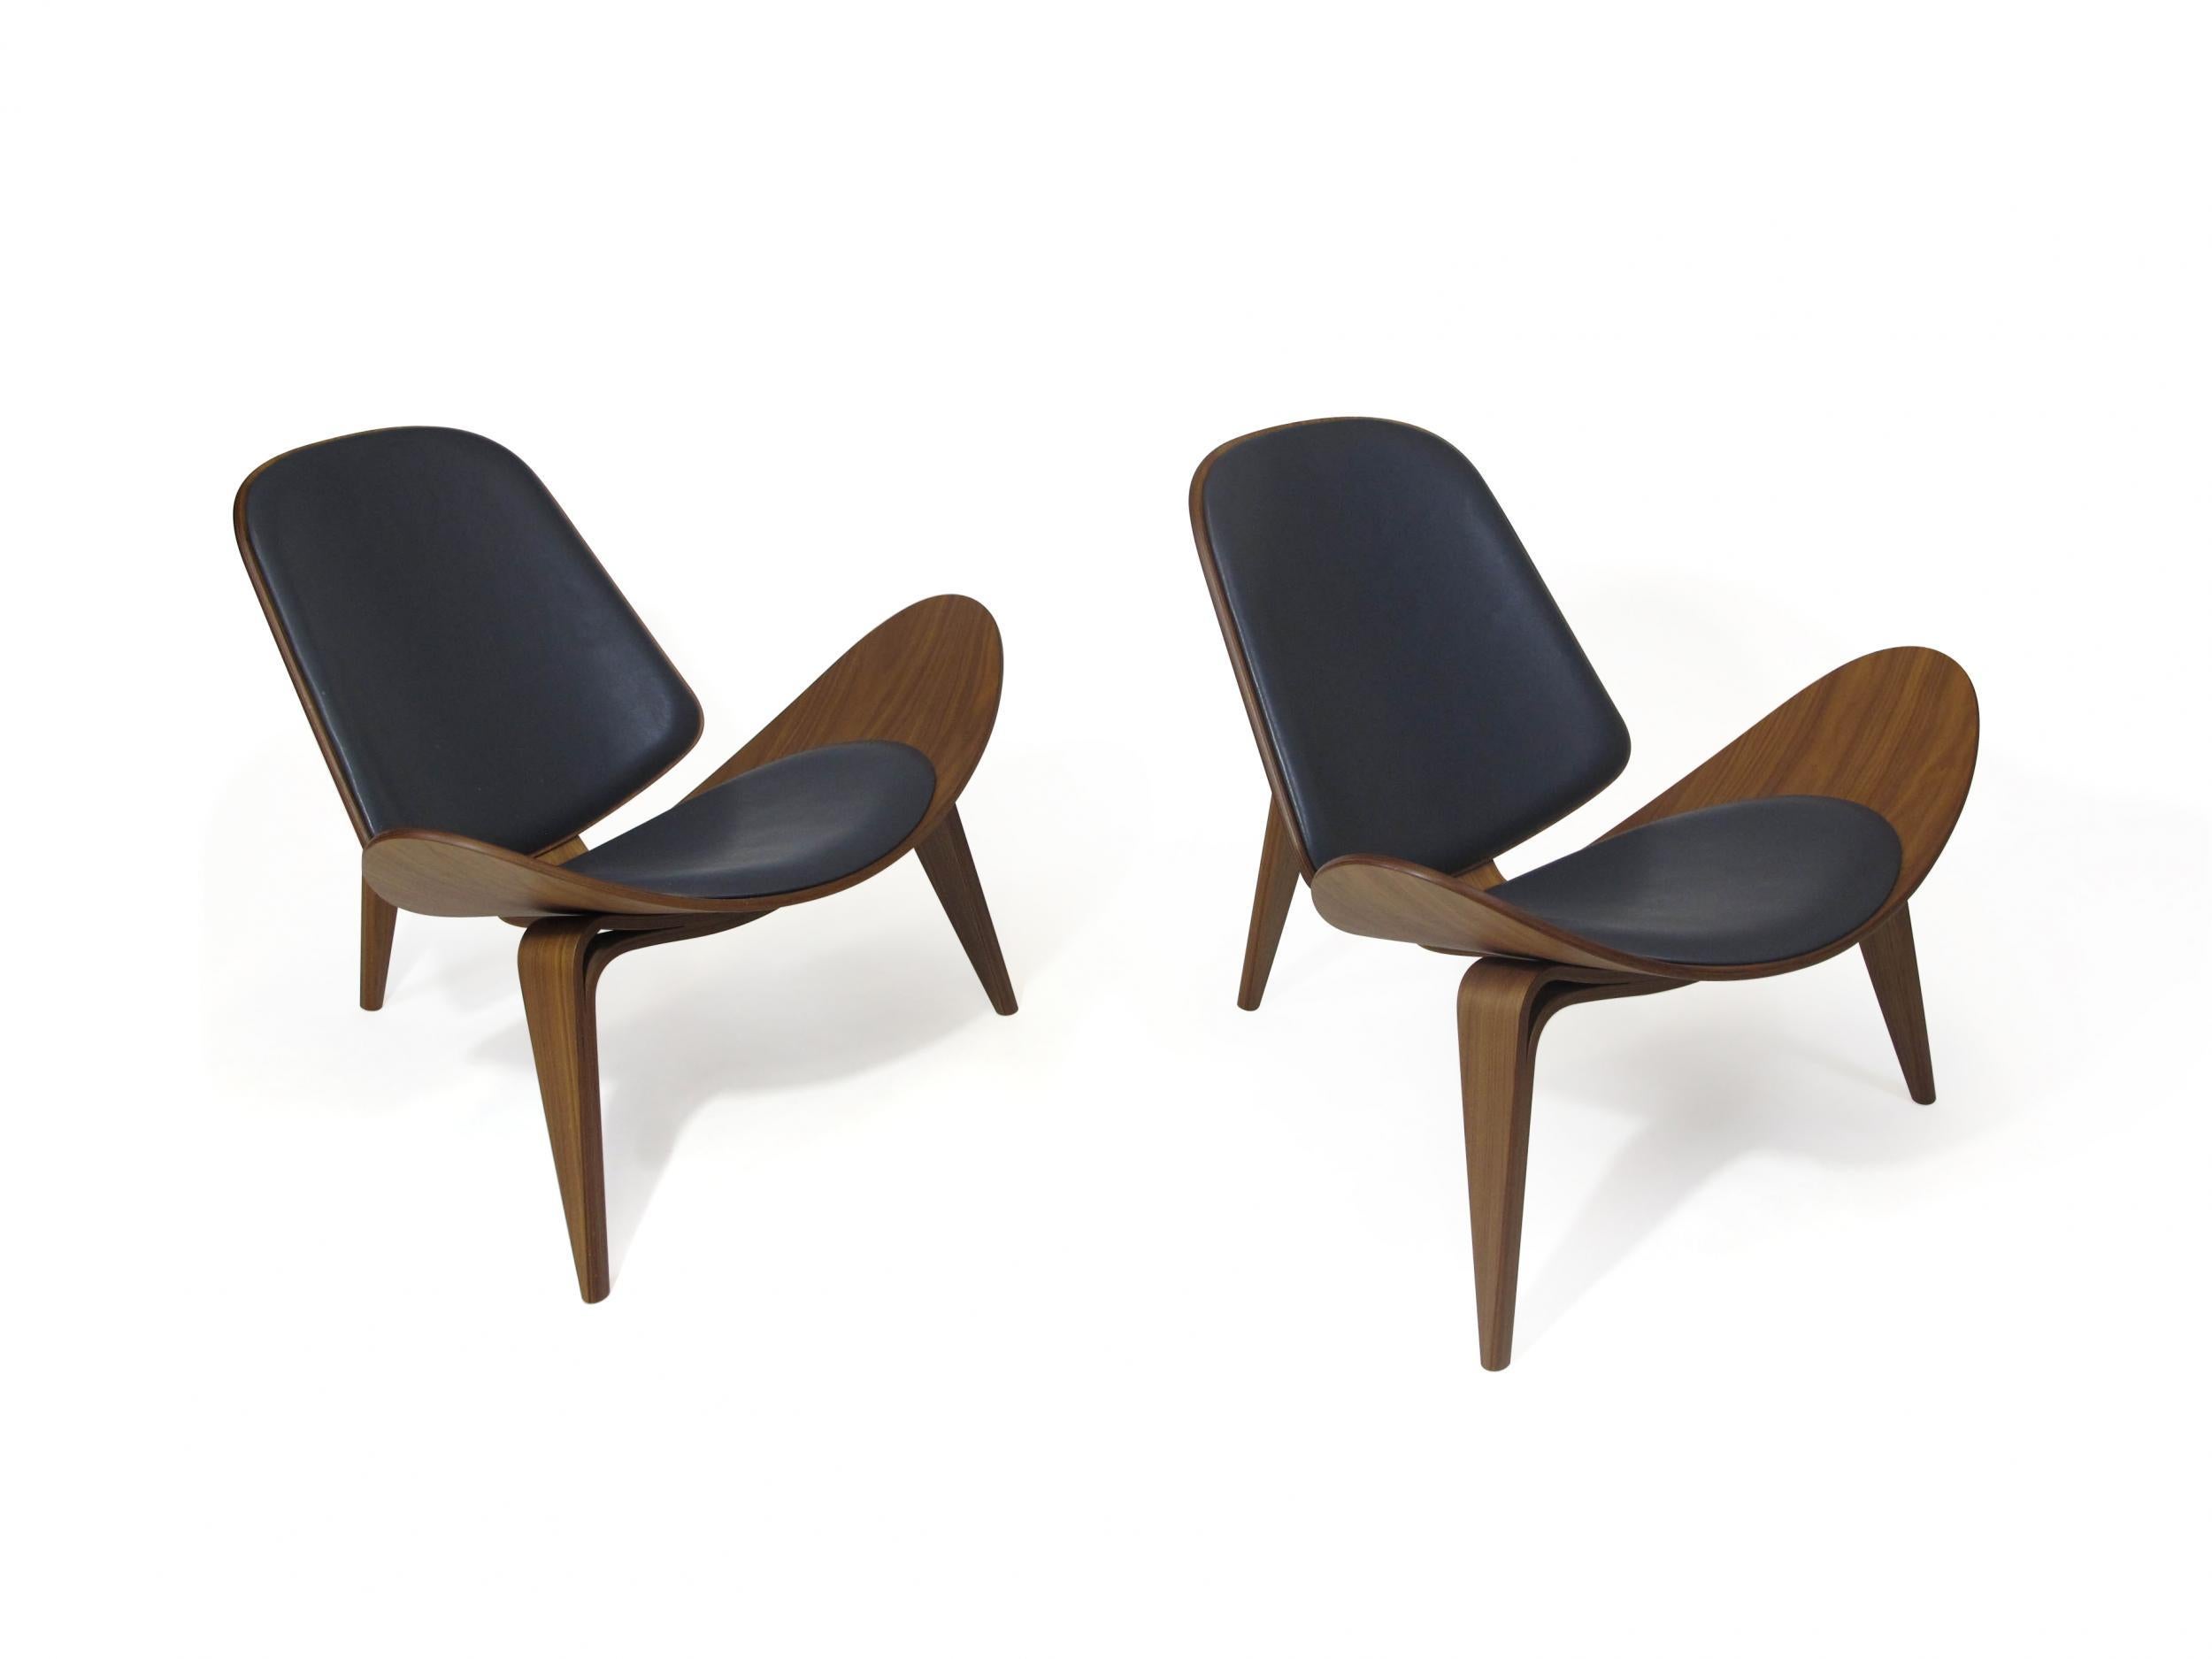 Contemporary Hans J. Wegner Walnut CH 07 Shell Chairs in Black Leather